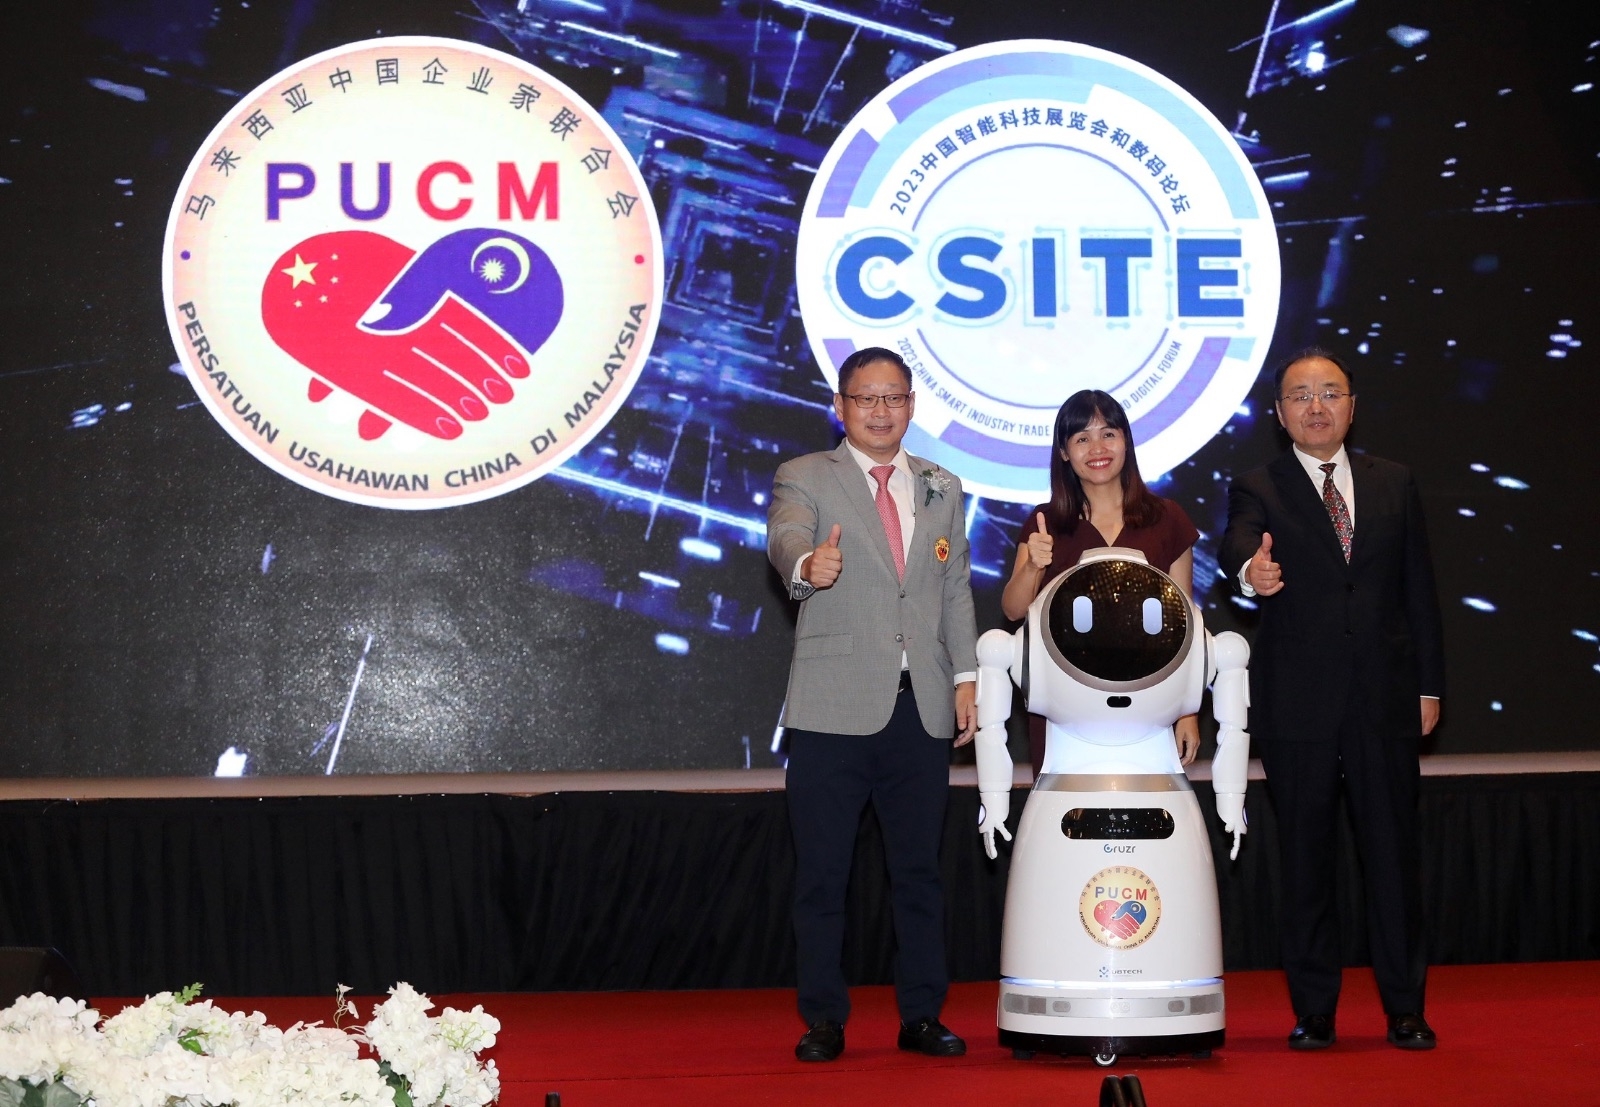 Chinese Ambassdor  and Deputy KKD Minister officiated PUCM’s 2023 CSITE  